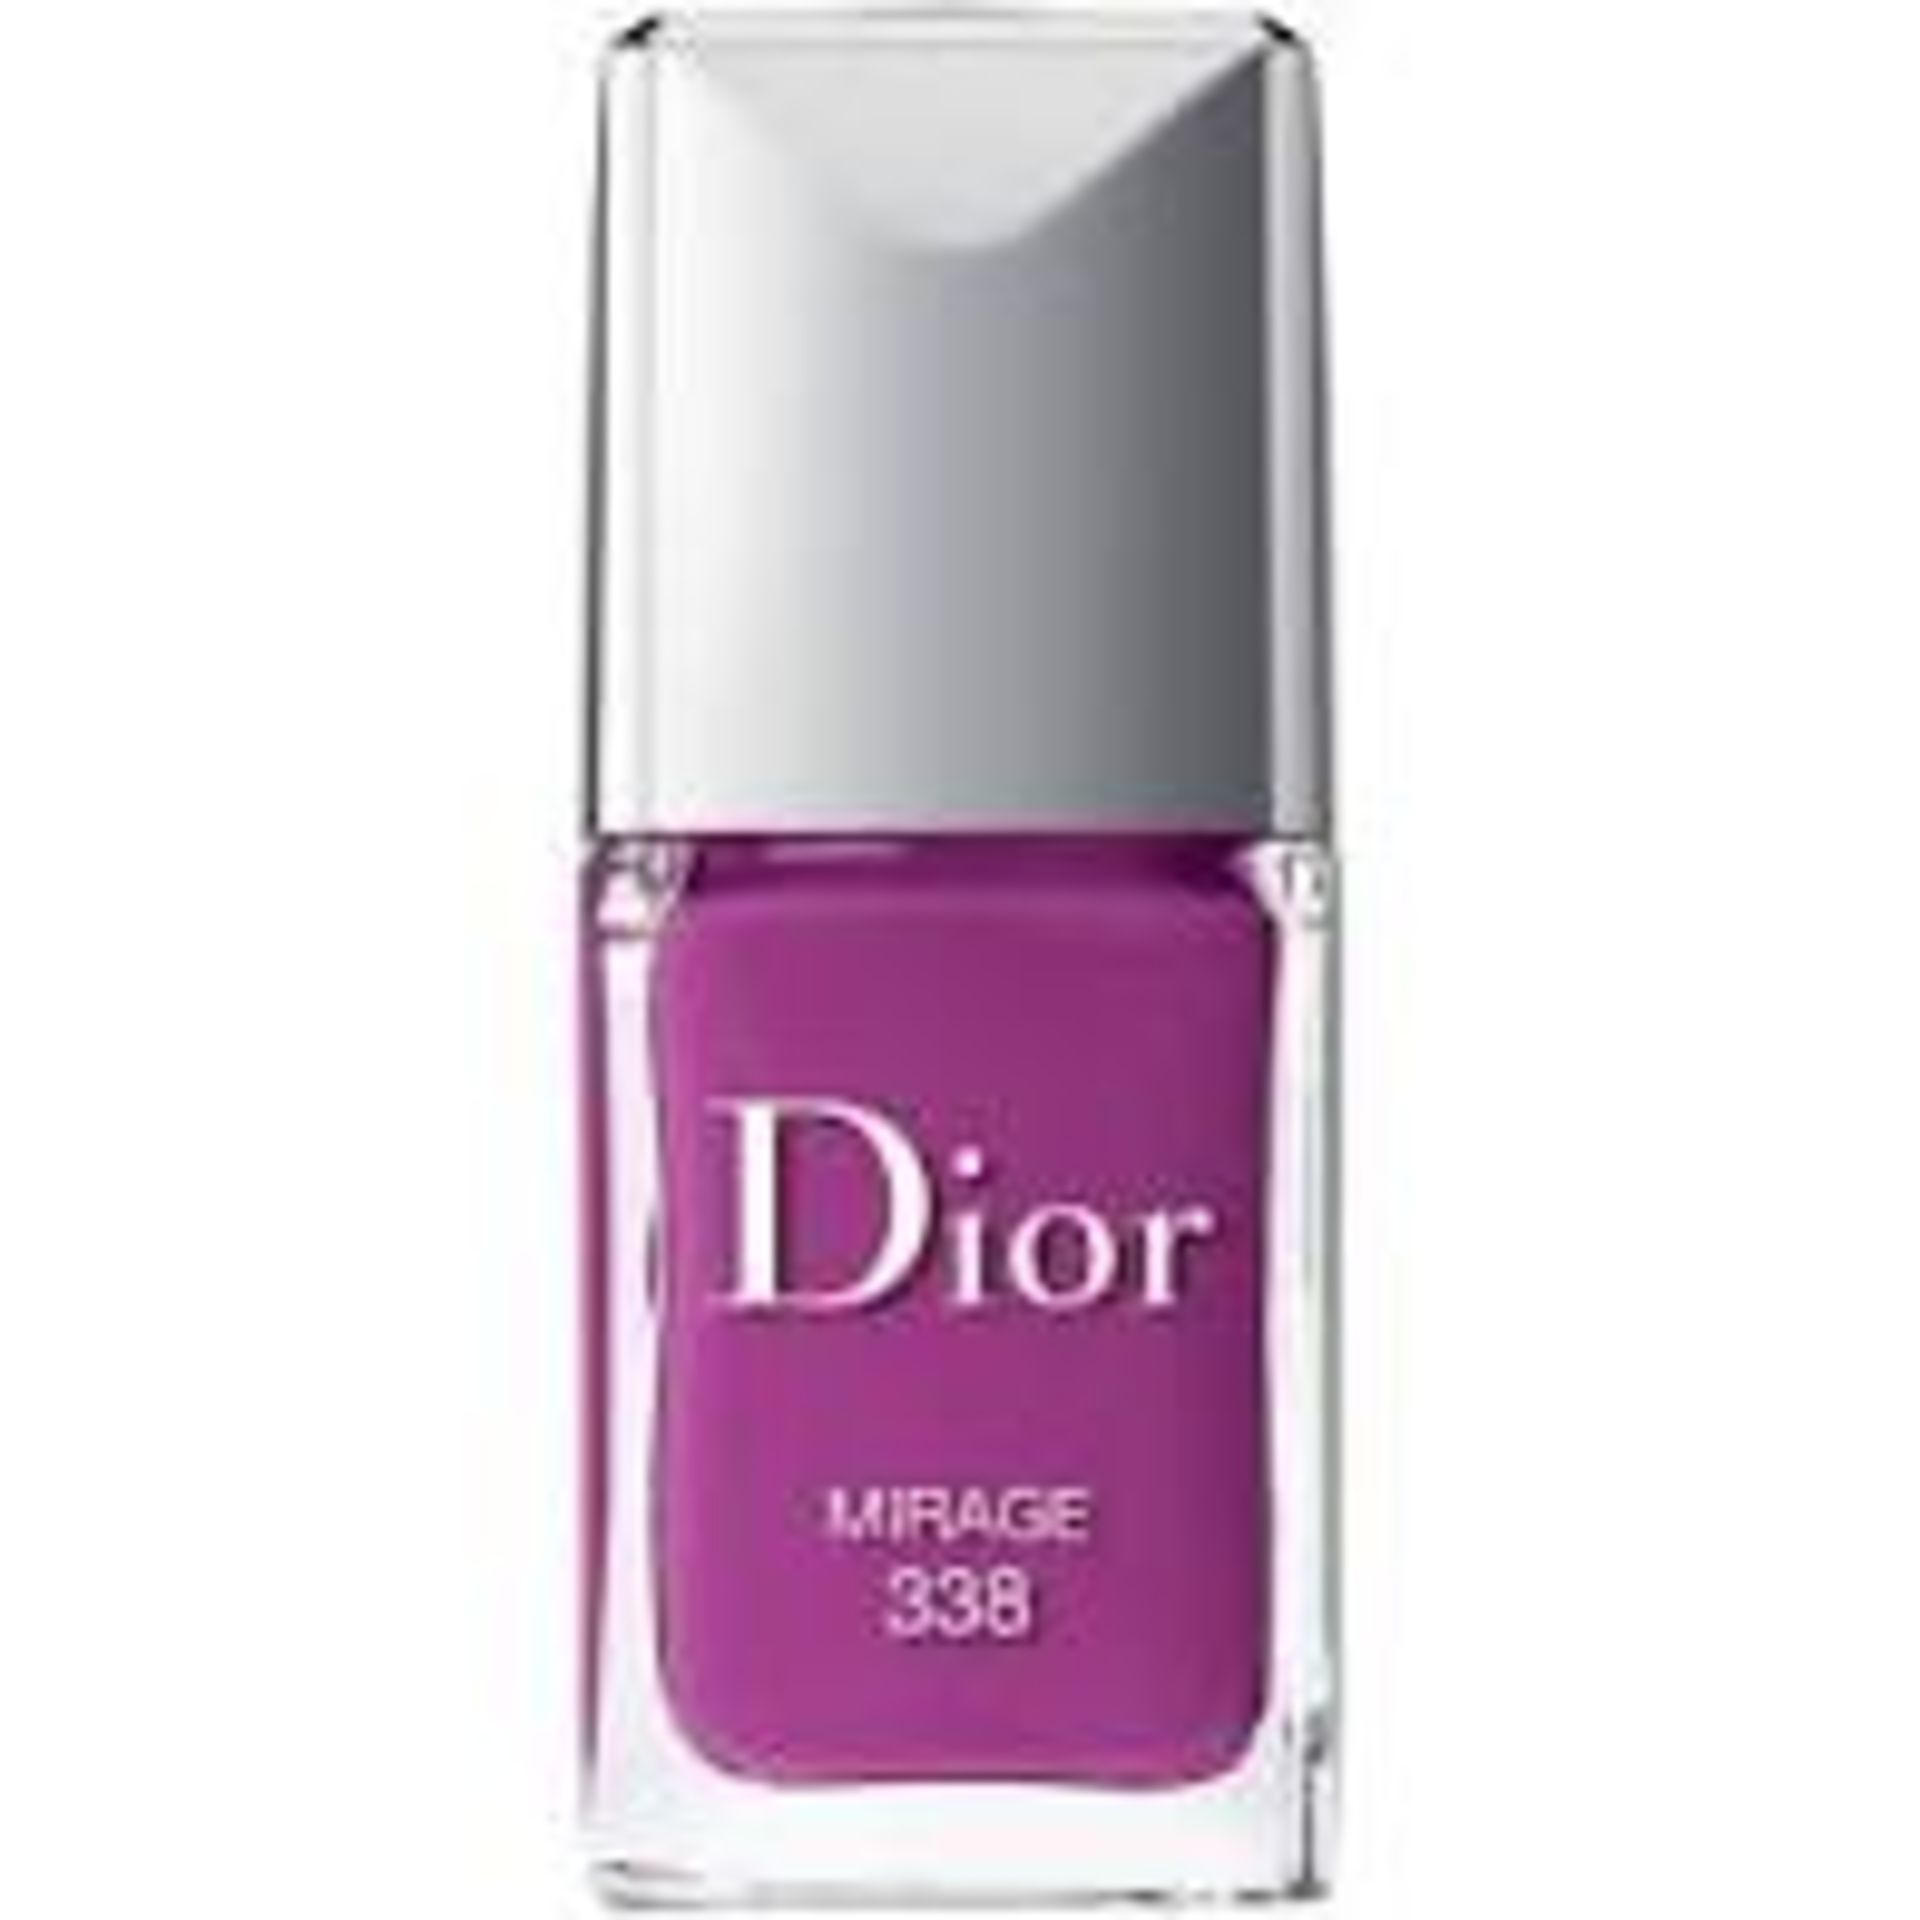 RRP £22 Dior Vernis Nail Polish (338 Mirage) (Ex Display) (Pictures Are For Illustration Purposes